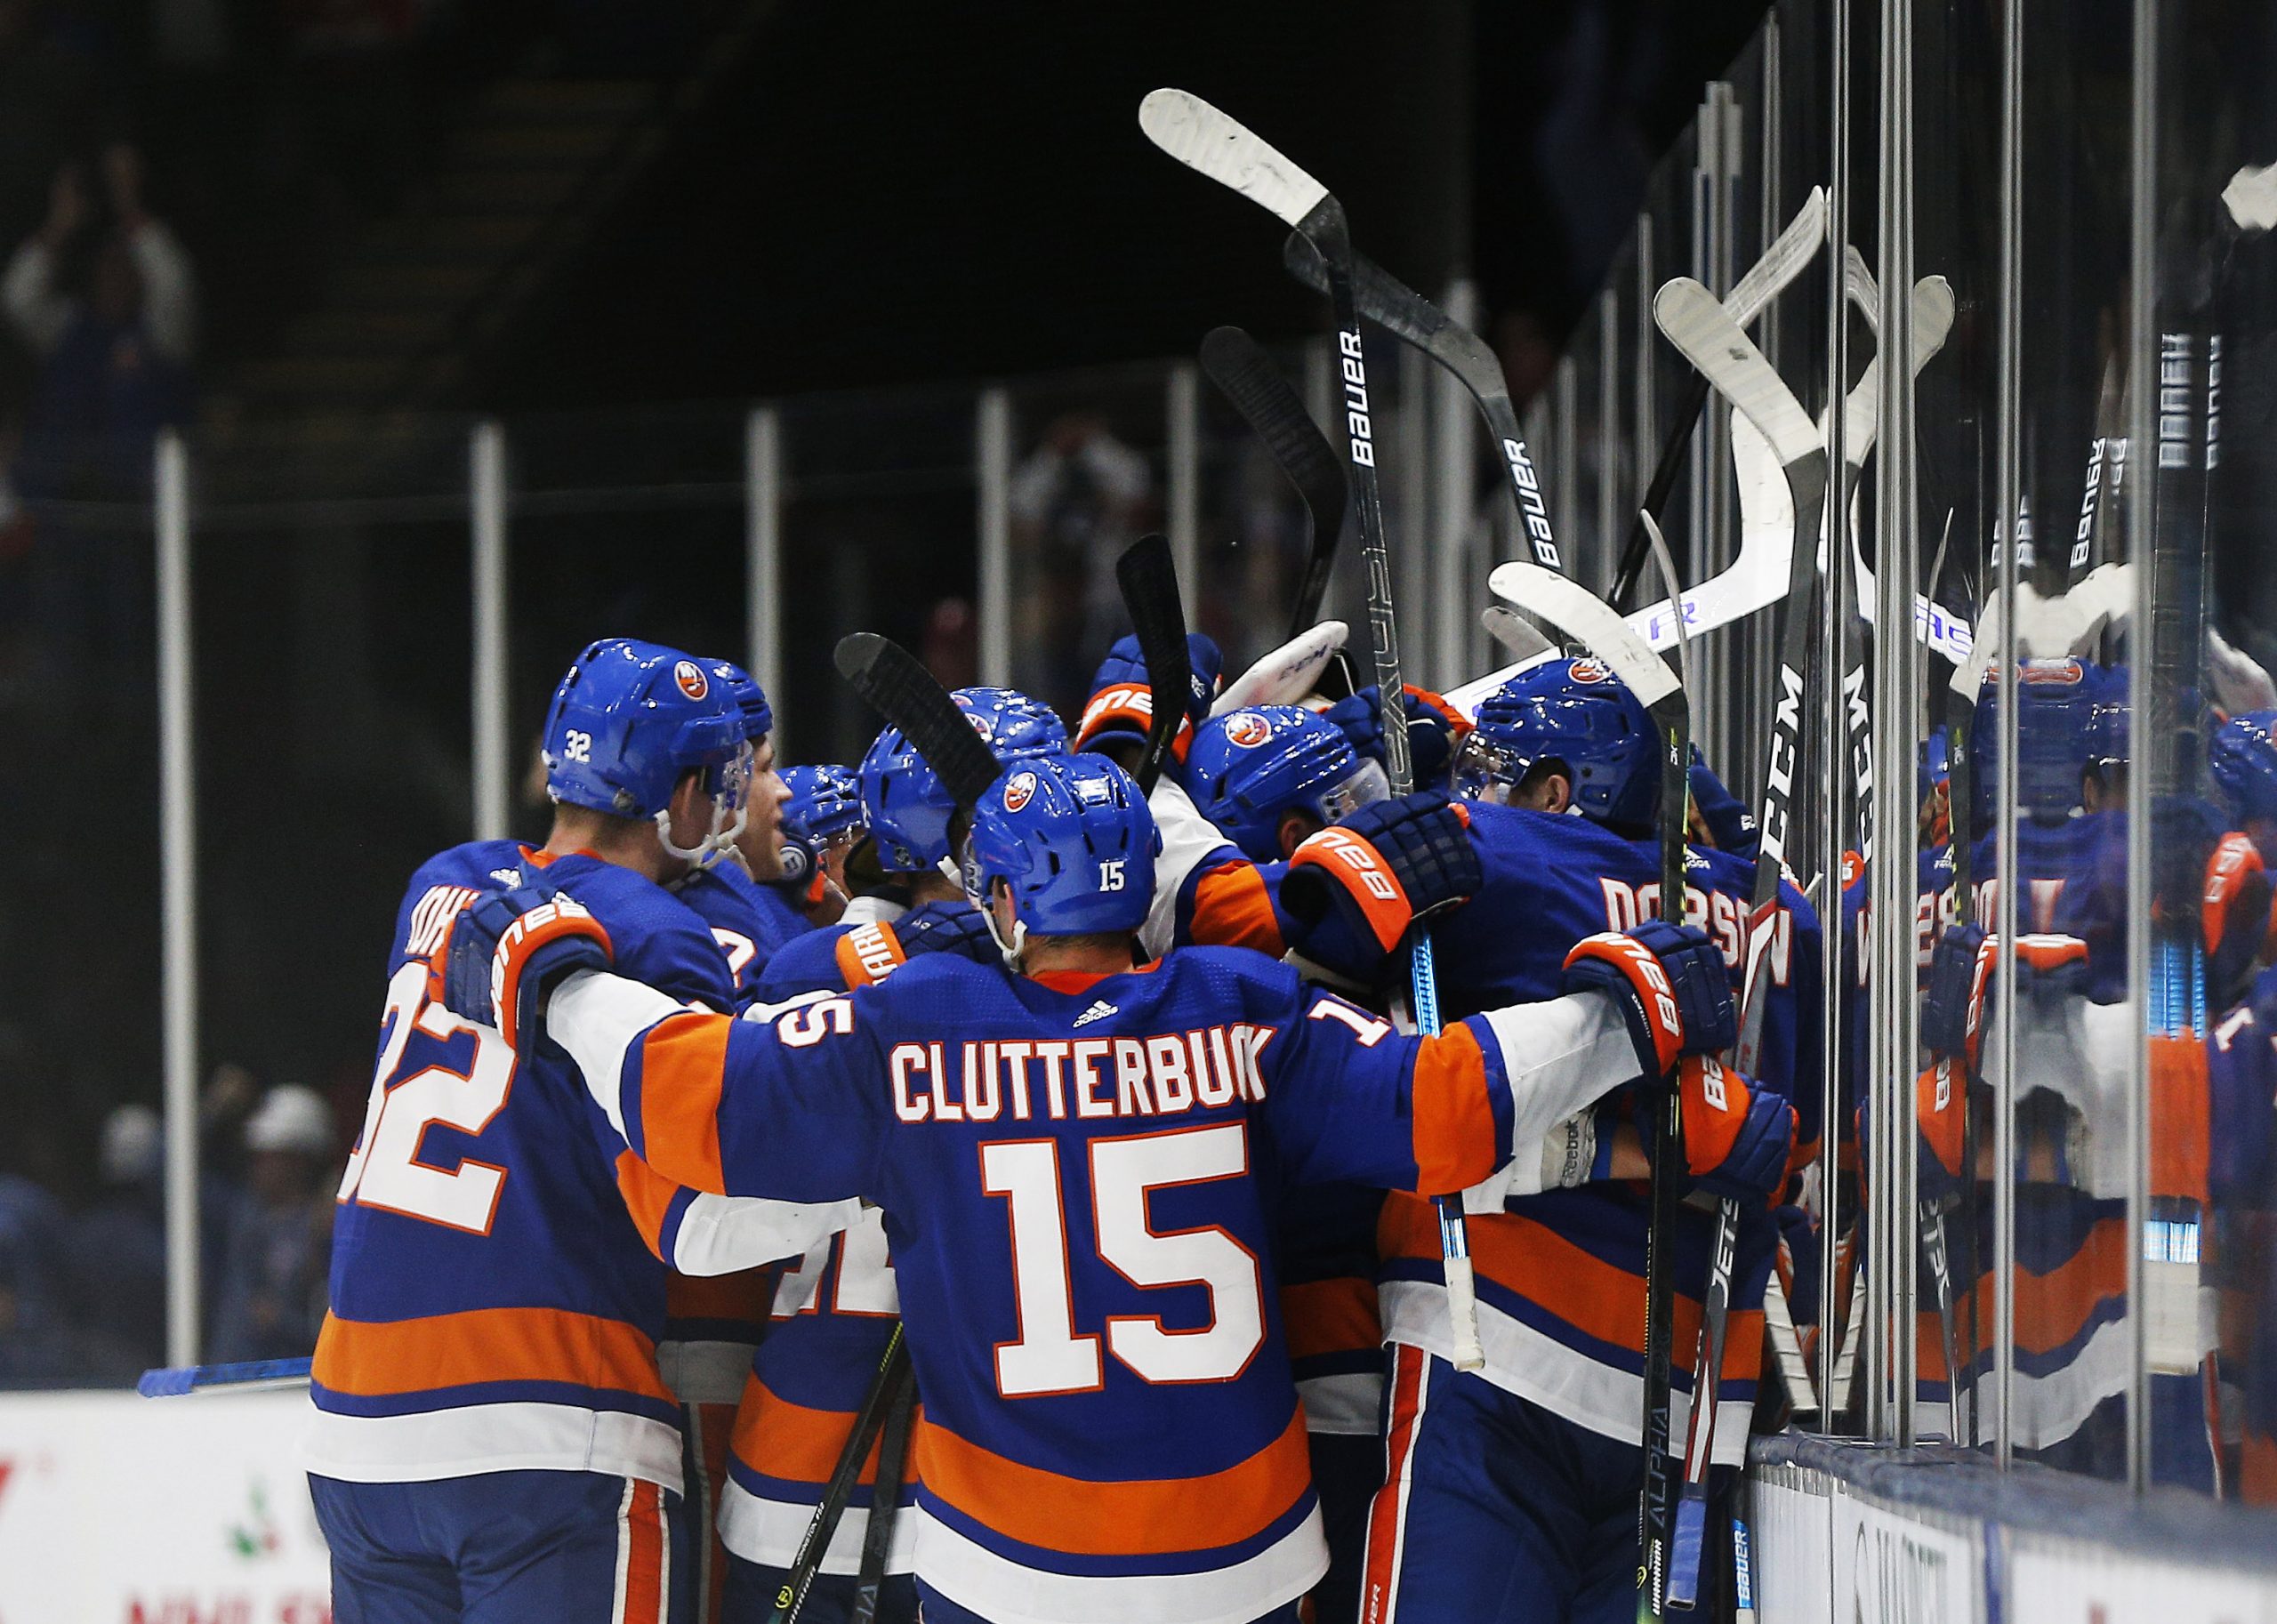 Dec 14, 2019; Uniondale, NY, USA; New York Islanders players celebrate after defeating the Buffalo Sabres at Nassau Veterans Memorial Coliseum. Mandatory Credit: Andy Marlin-USA TODAY Sports